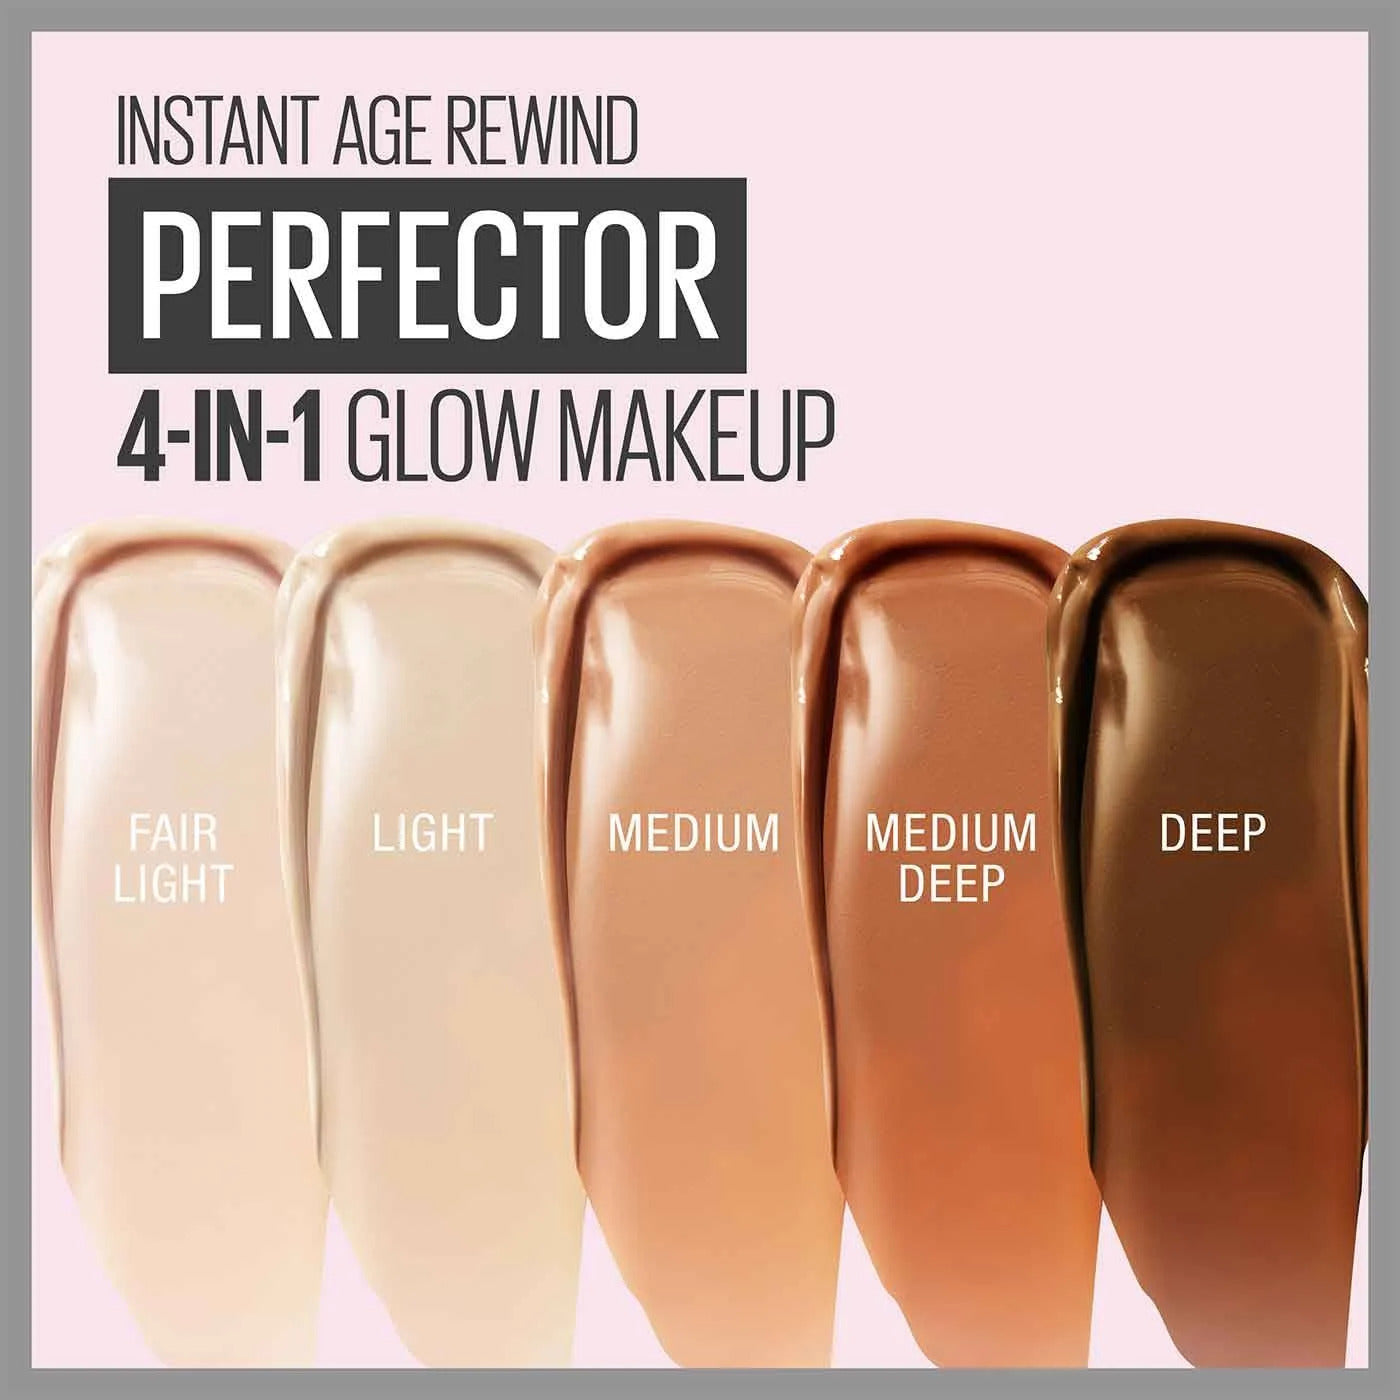 Maybelline Instant Age Rewind® Instant Perfector 4-in-1 Glow Makeup